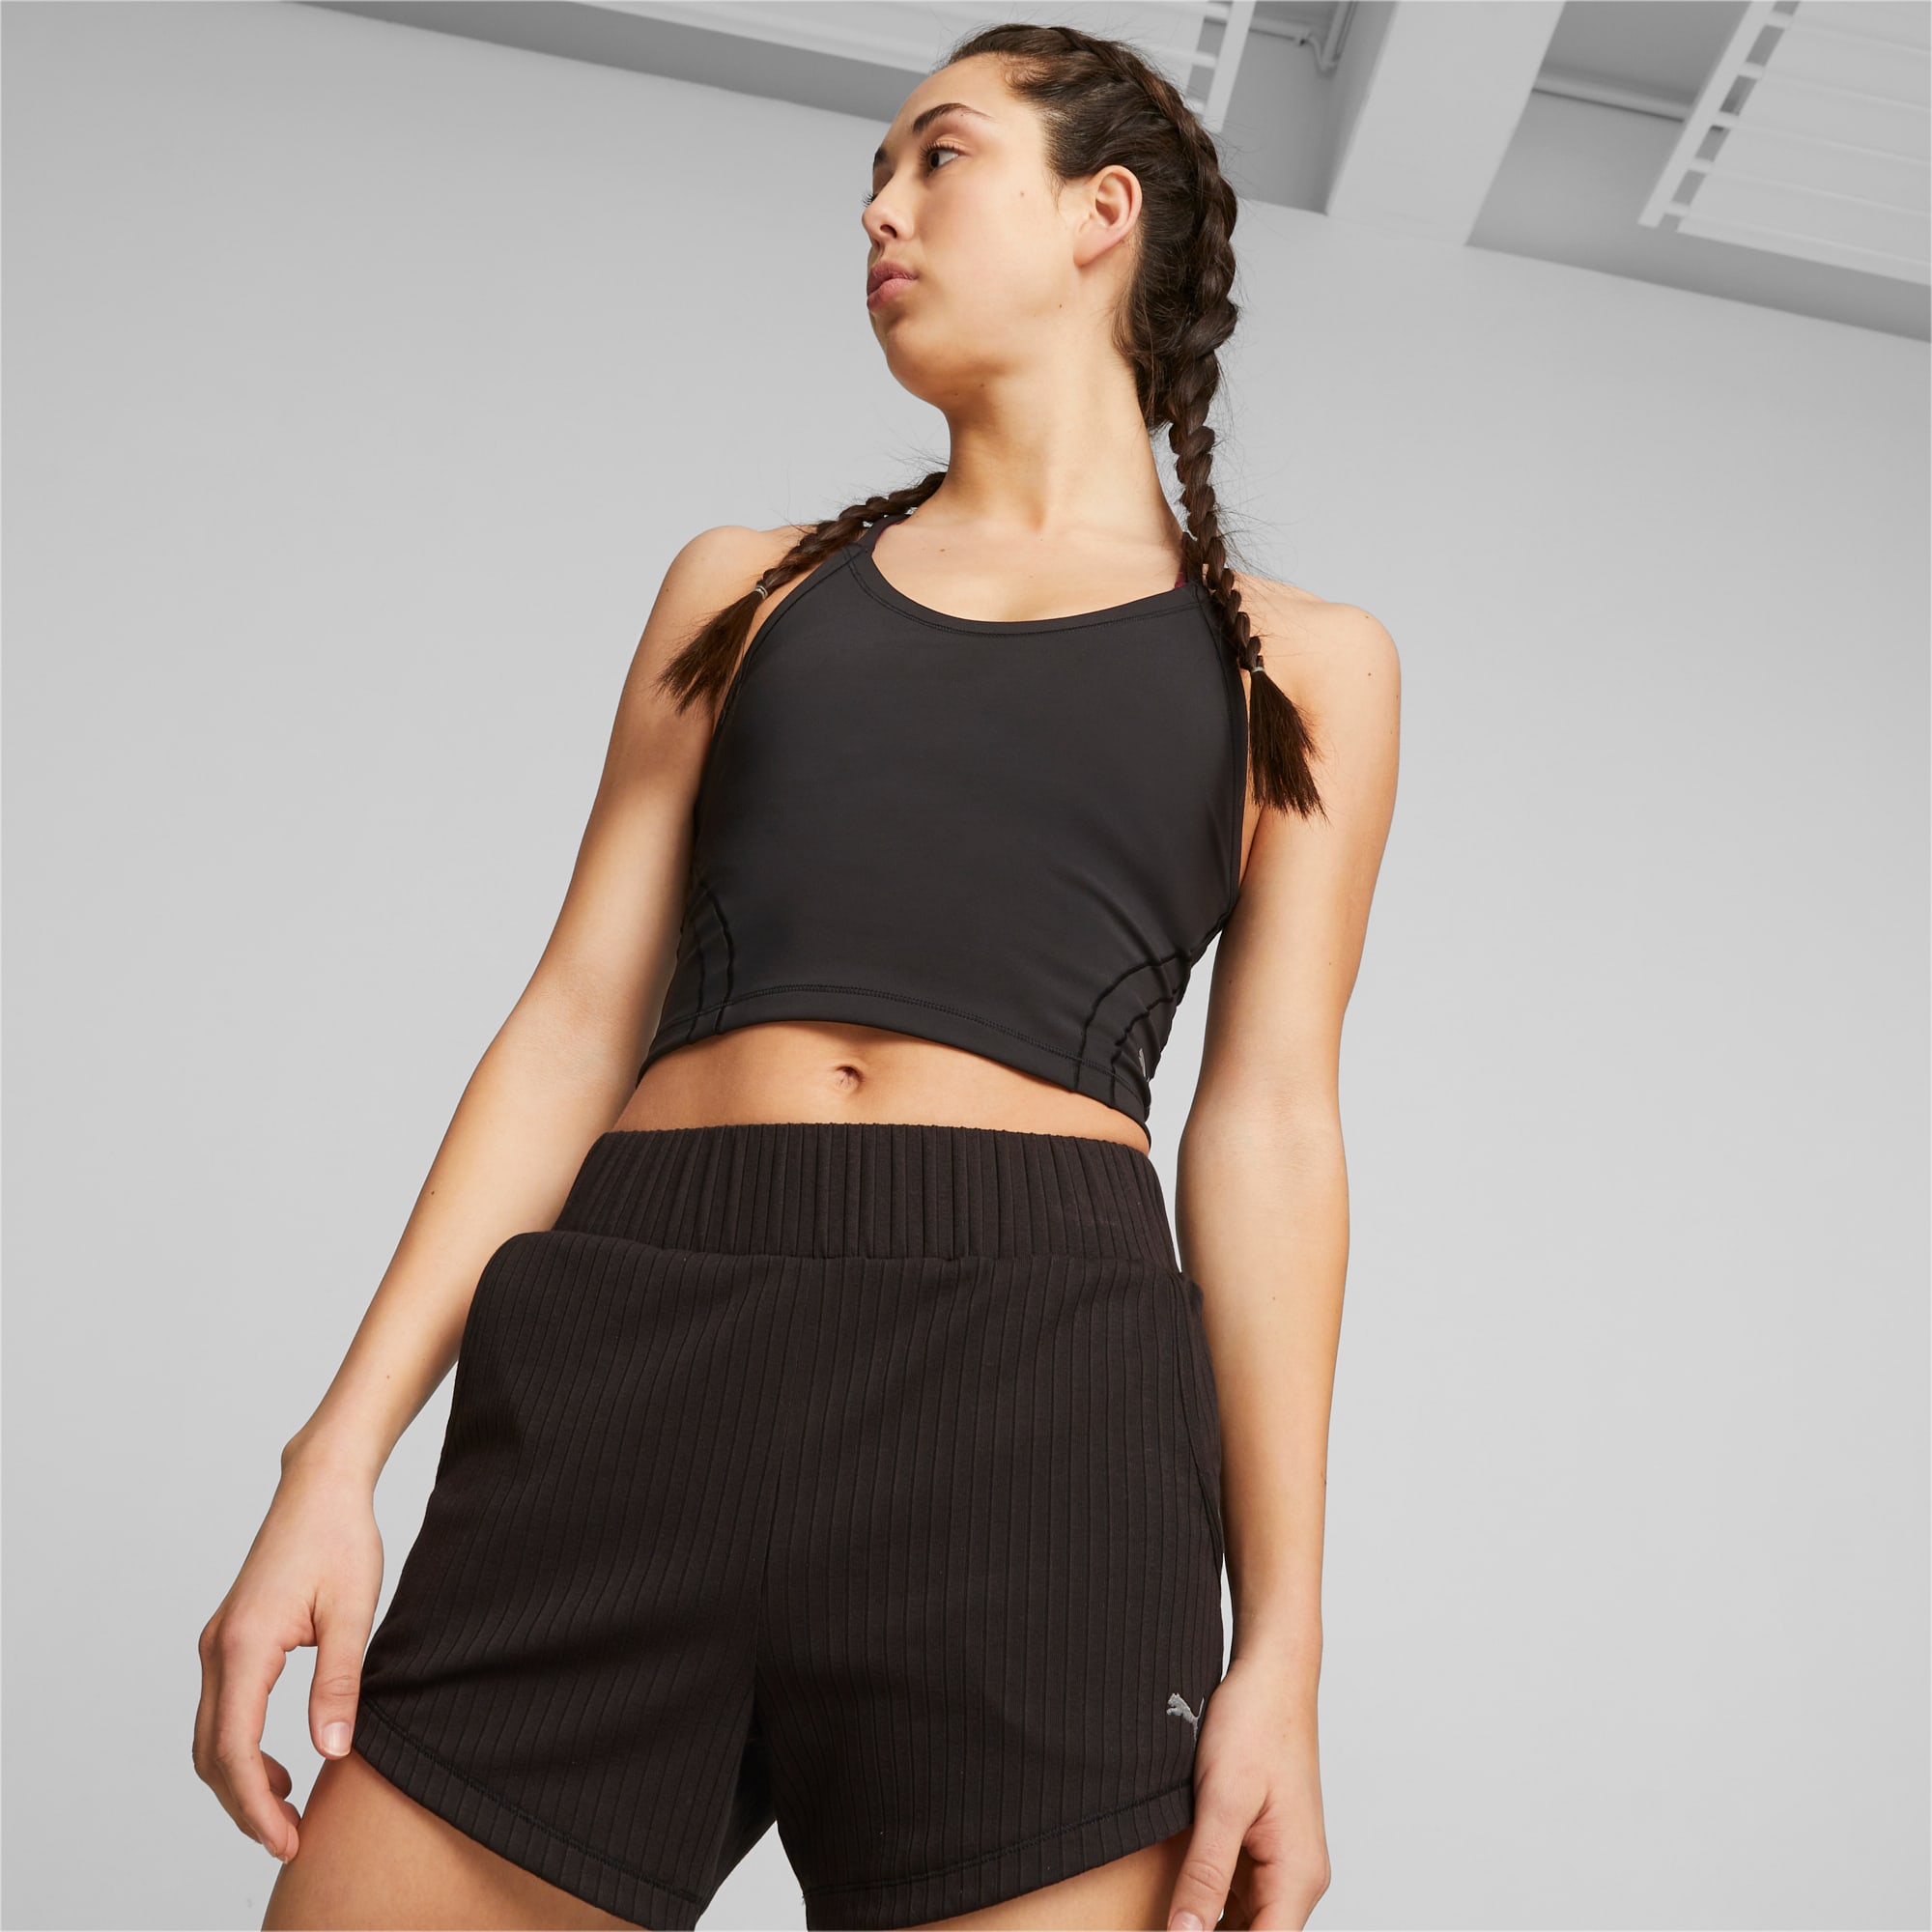 WOMENS RUNNING BARE ALL TIED UP CROP TOP